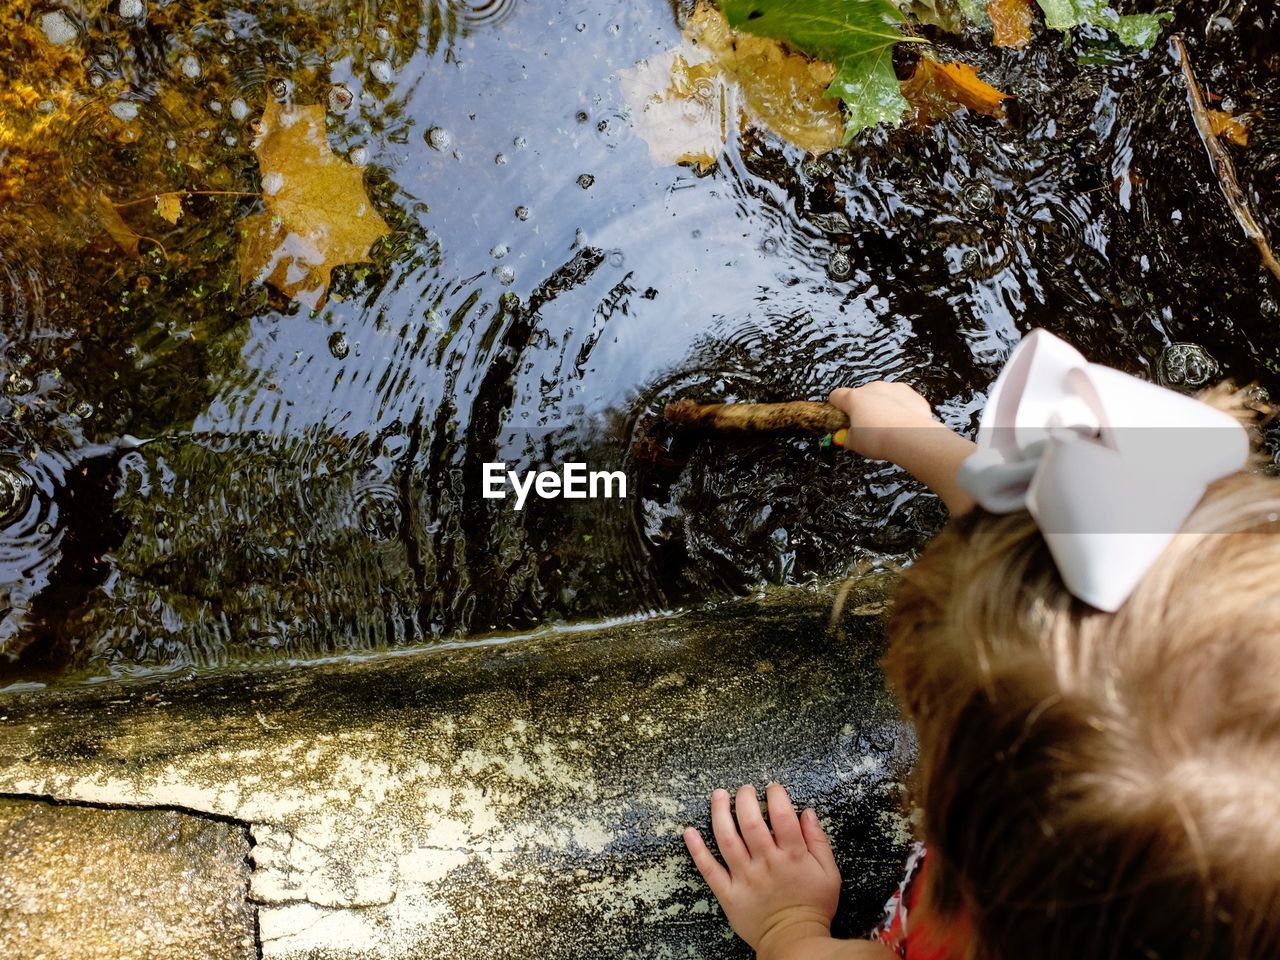 Cropped image of girl holding stick in pond at fairbury city park